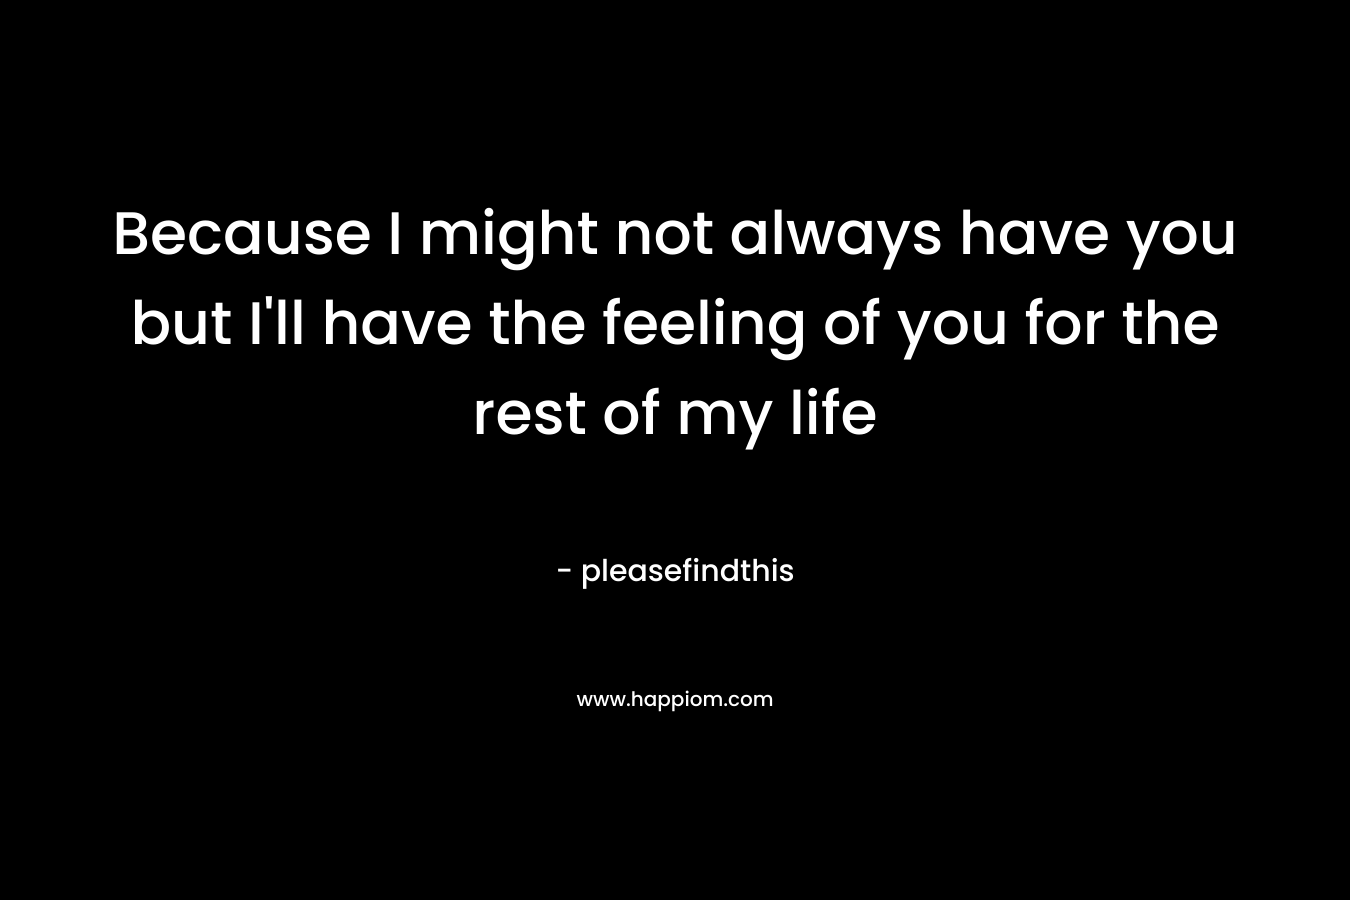 Because I might not always have you but I’ll have the feeling of you for the rest of my life – pleasefindthis